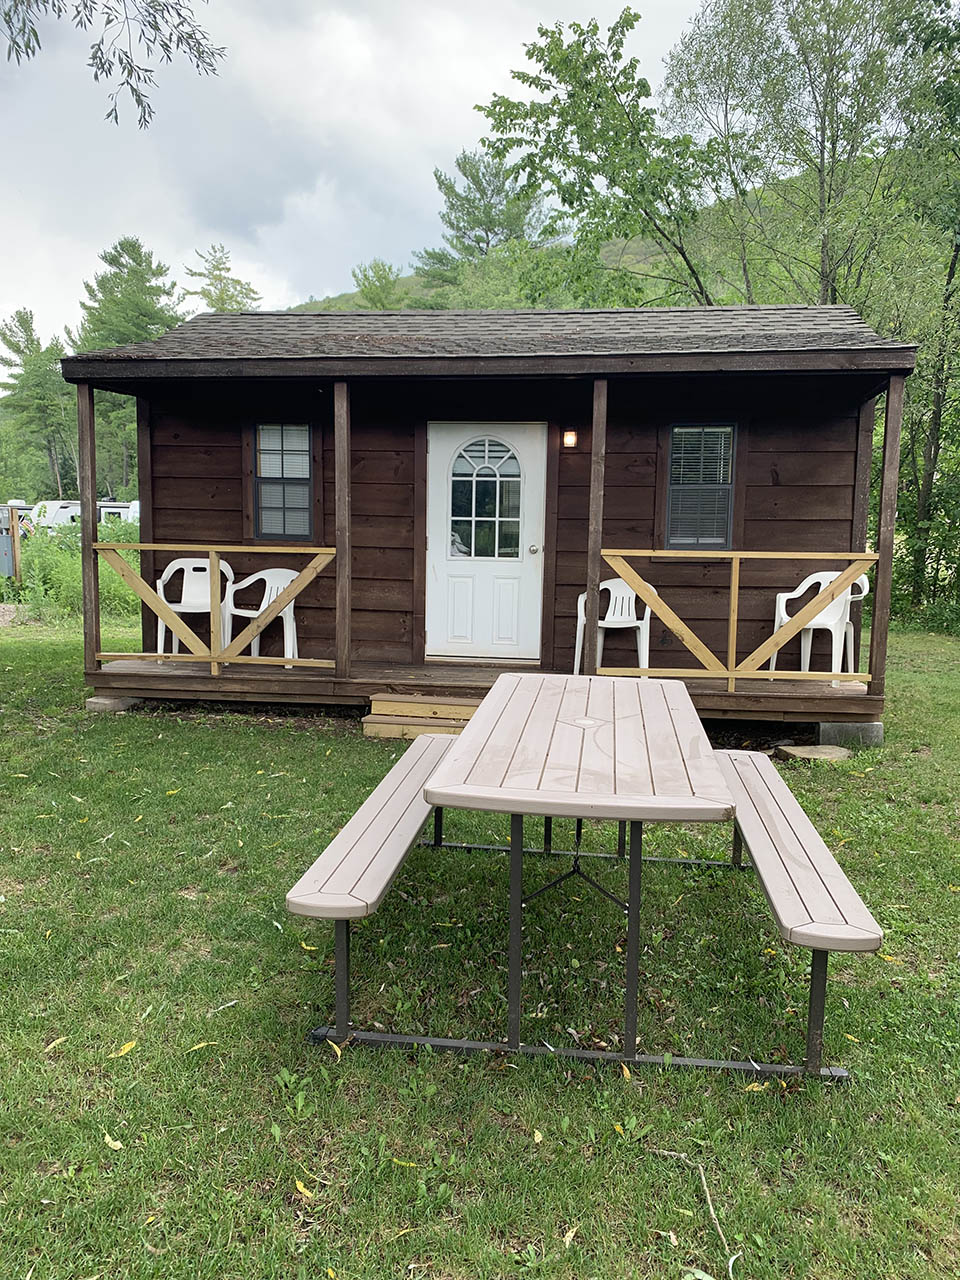 exterior of cabin with picnic table